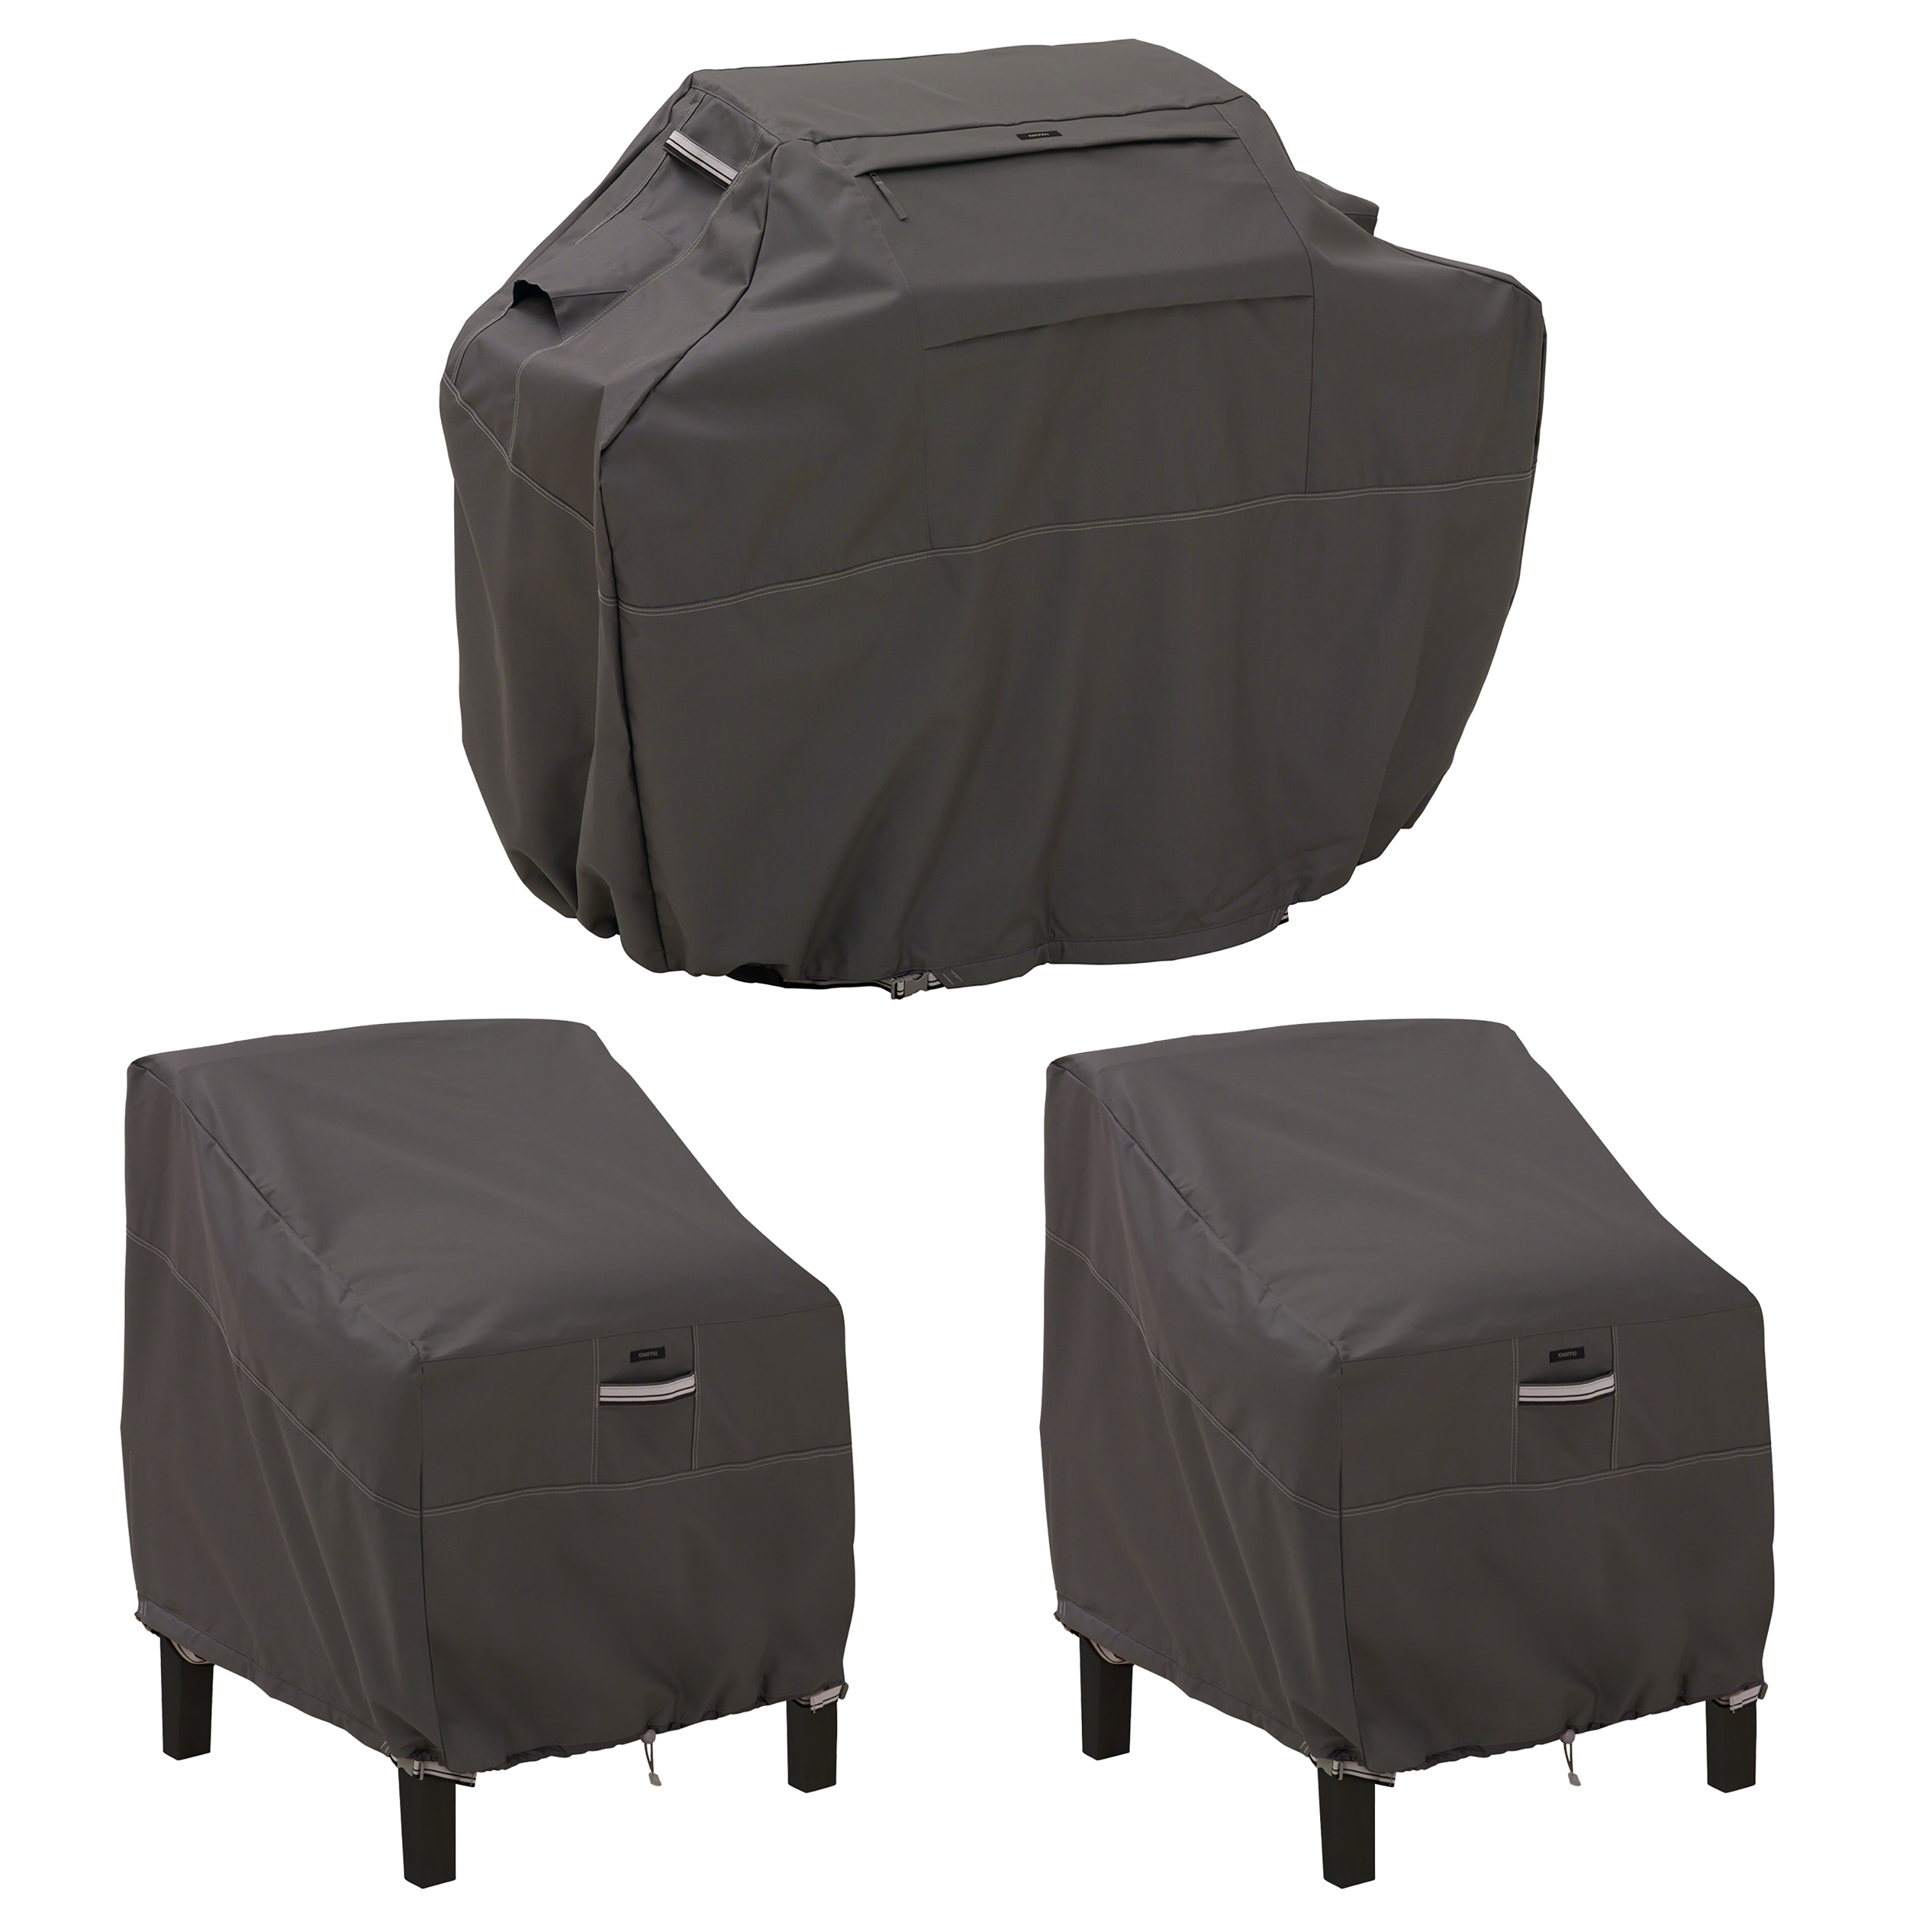 Classic Accessories Ravenna Water-Resistant 64 Inch BBQ Grill Cover and 38 Inch Patio Lounge Chair Cover Bundle - image 1 of 16